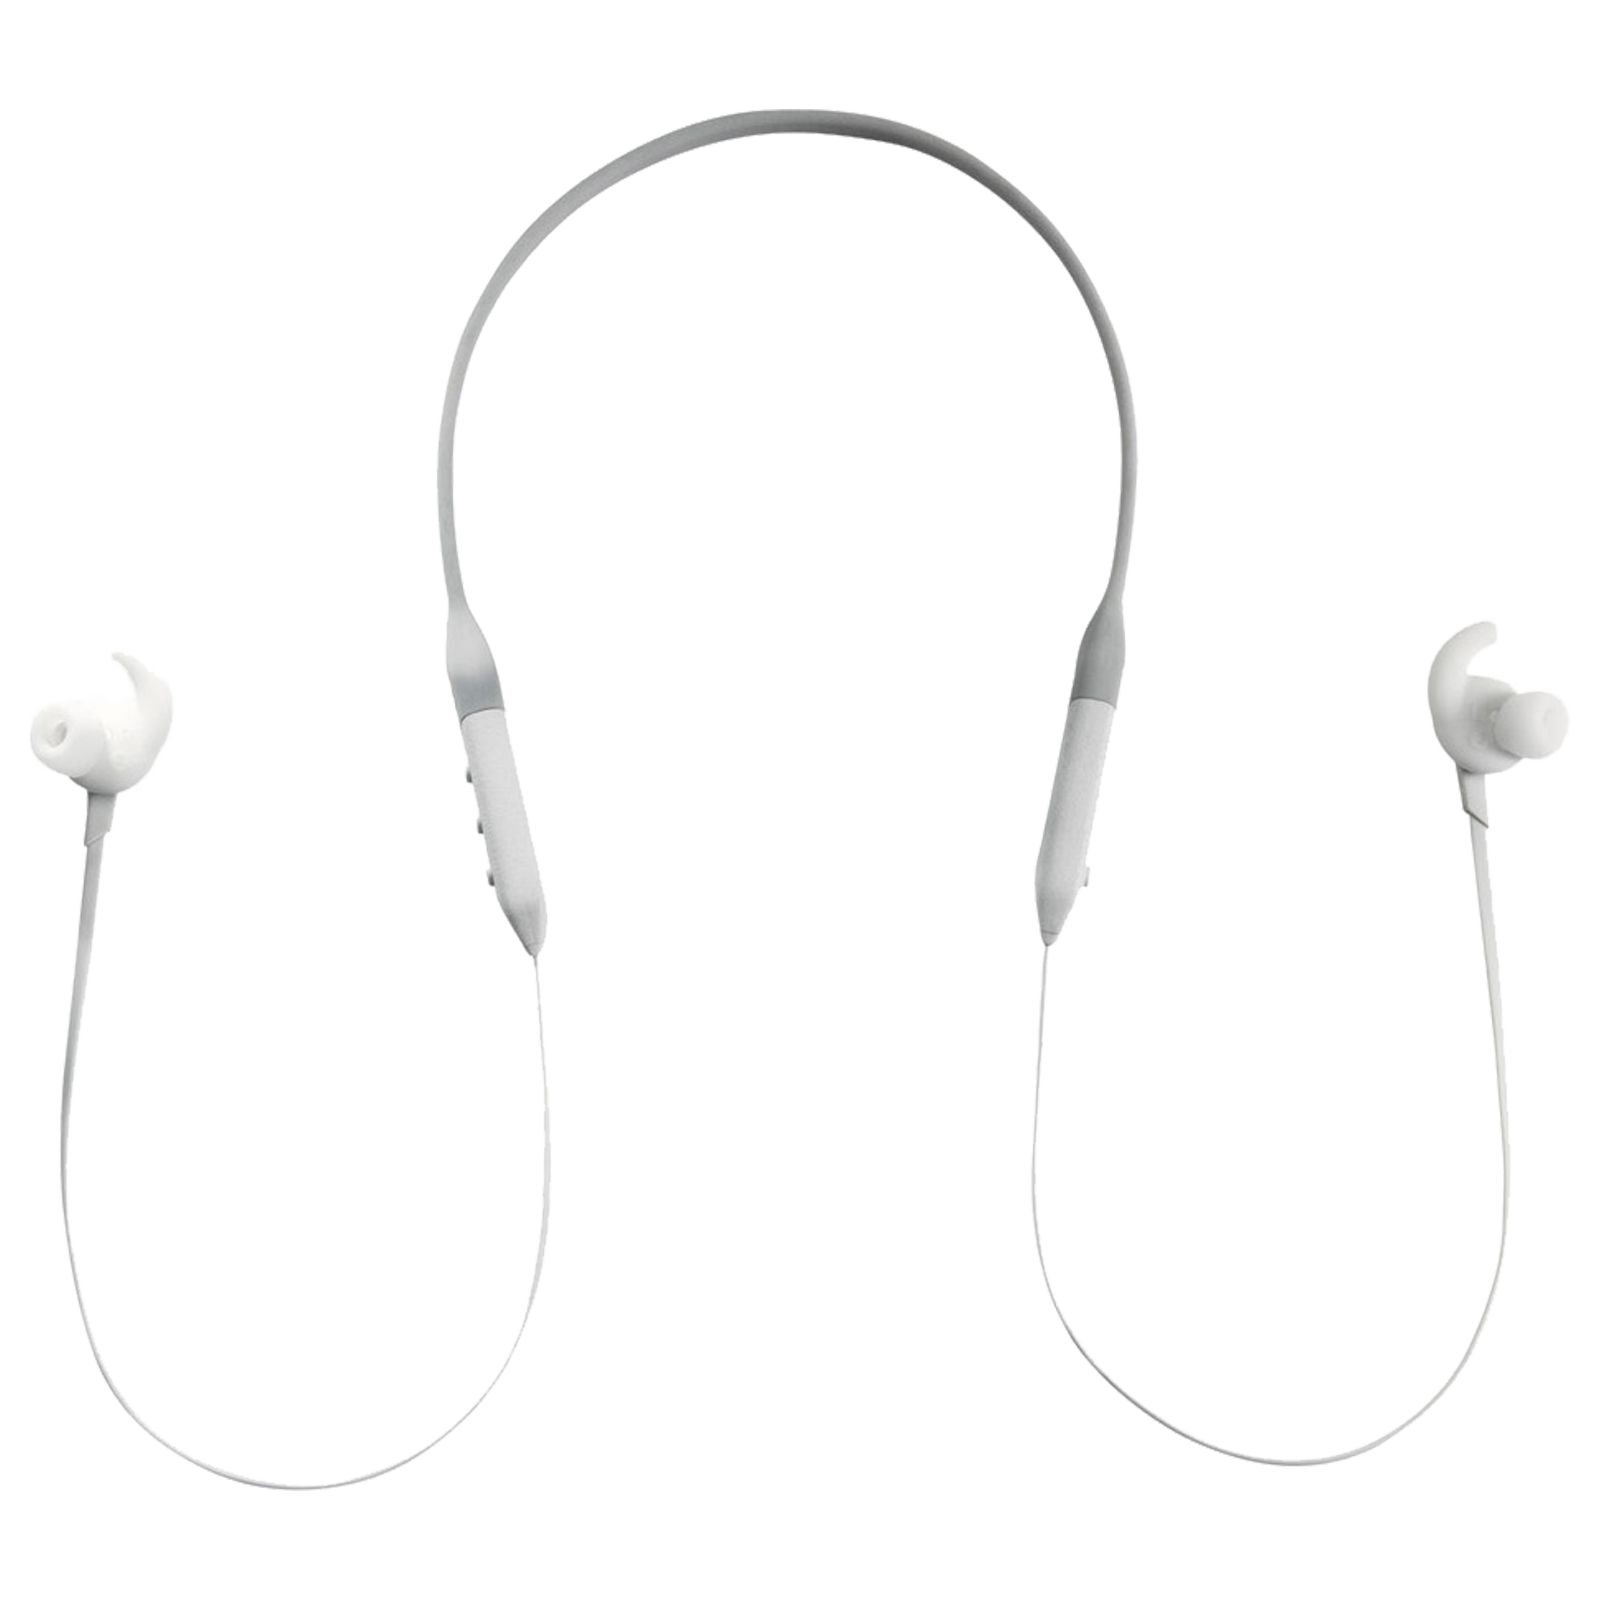 Adidas RPD-01 AD-RPD01-LGRY In-Ear Wireless Earphone with Mic (Bluetooth 5.0, Water Resistant, Light Grey)_1